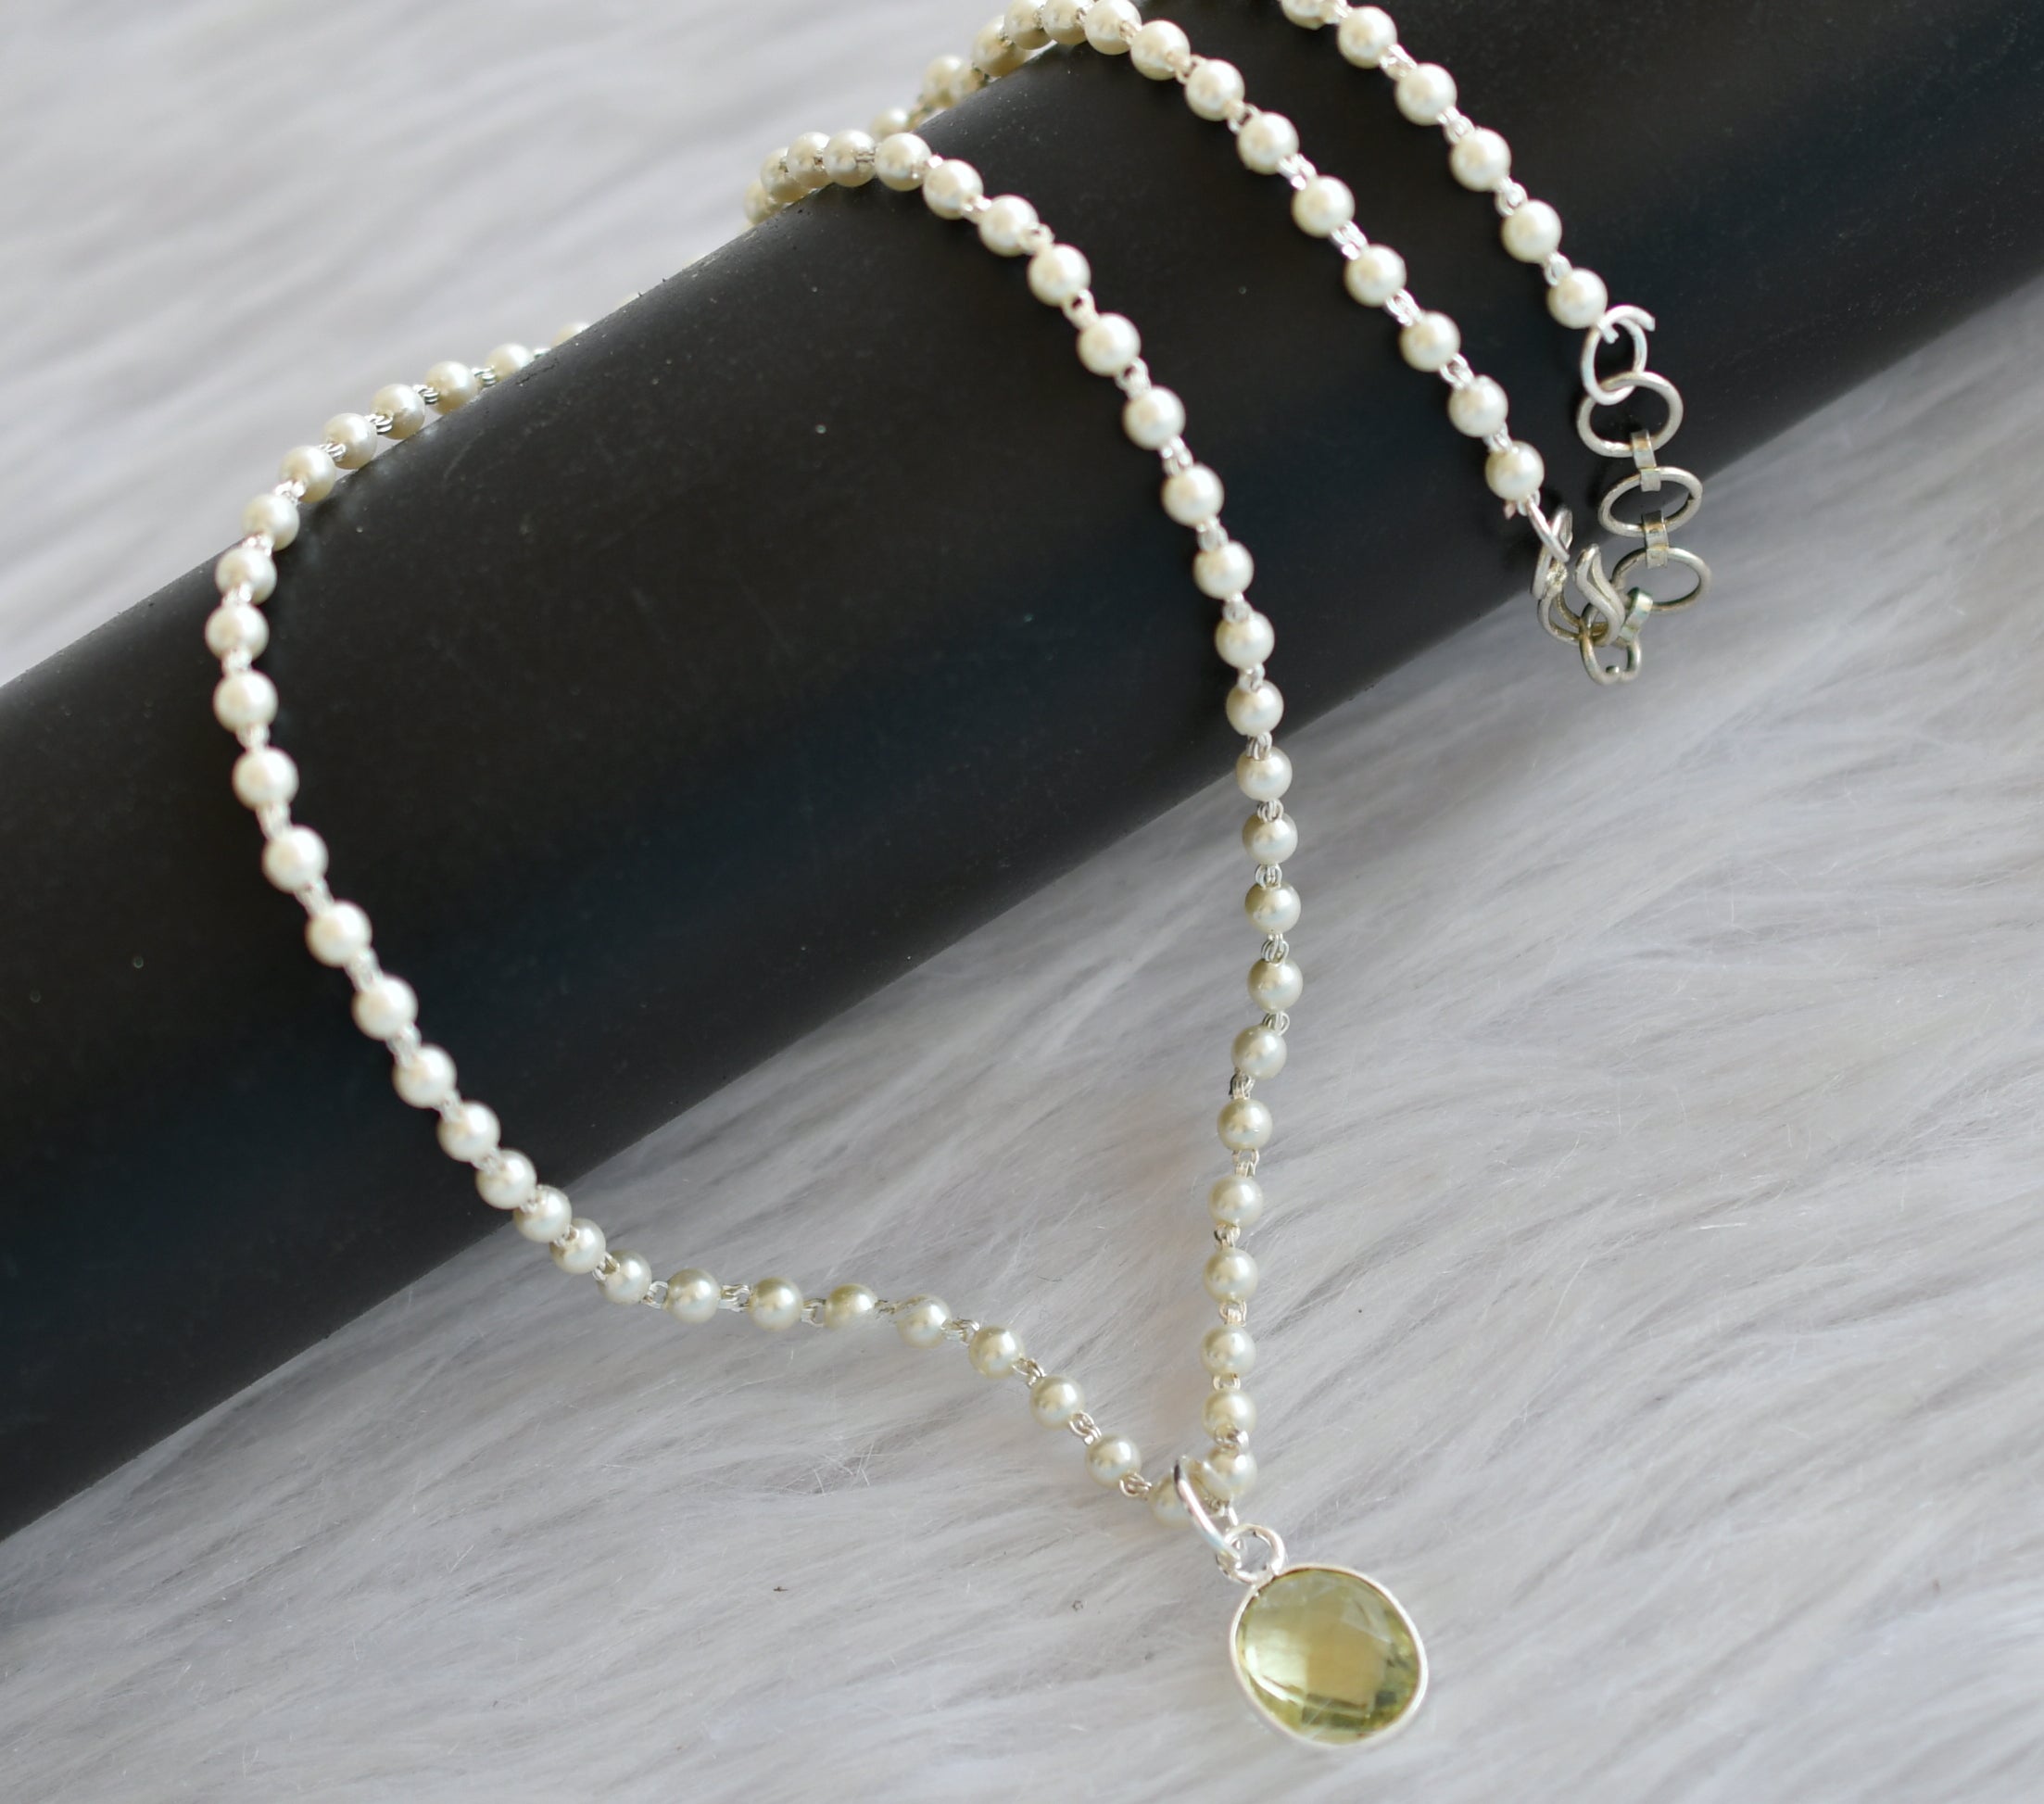 Buy Pearl Pendant Choker, Small Pearl Necklace, One Single Pearl Dainty  Necklace, Gold Steel Chain With Freshwater Pearl, Boho Bridal Jewelry  Online in India - Etsy